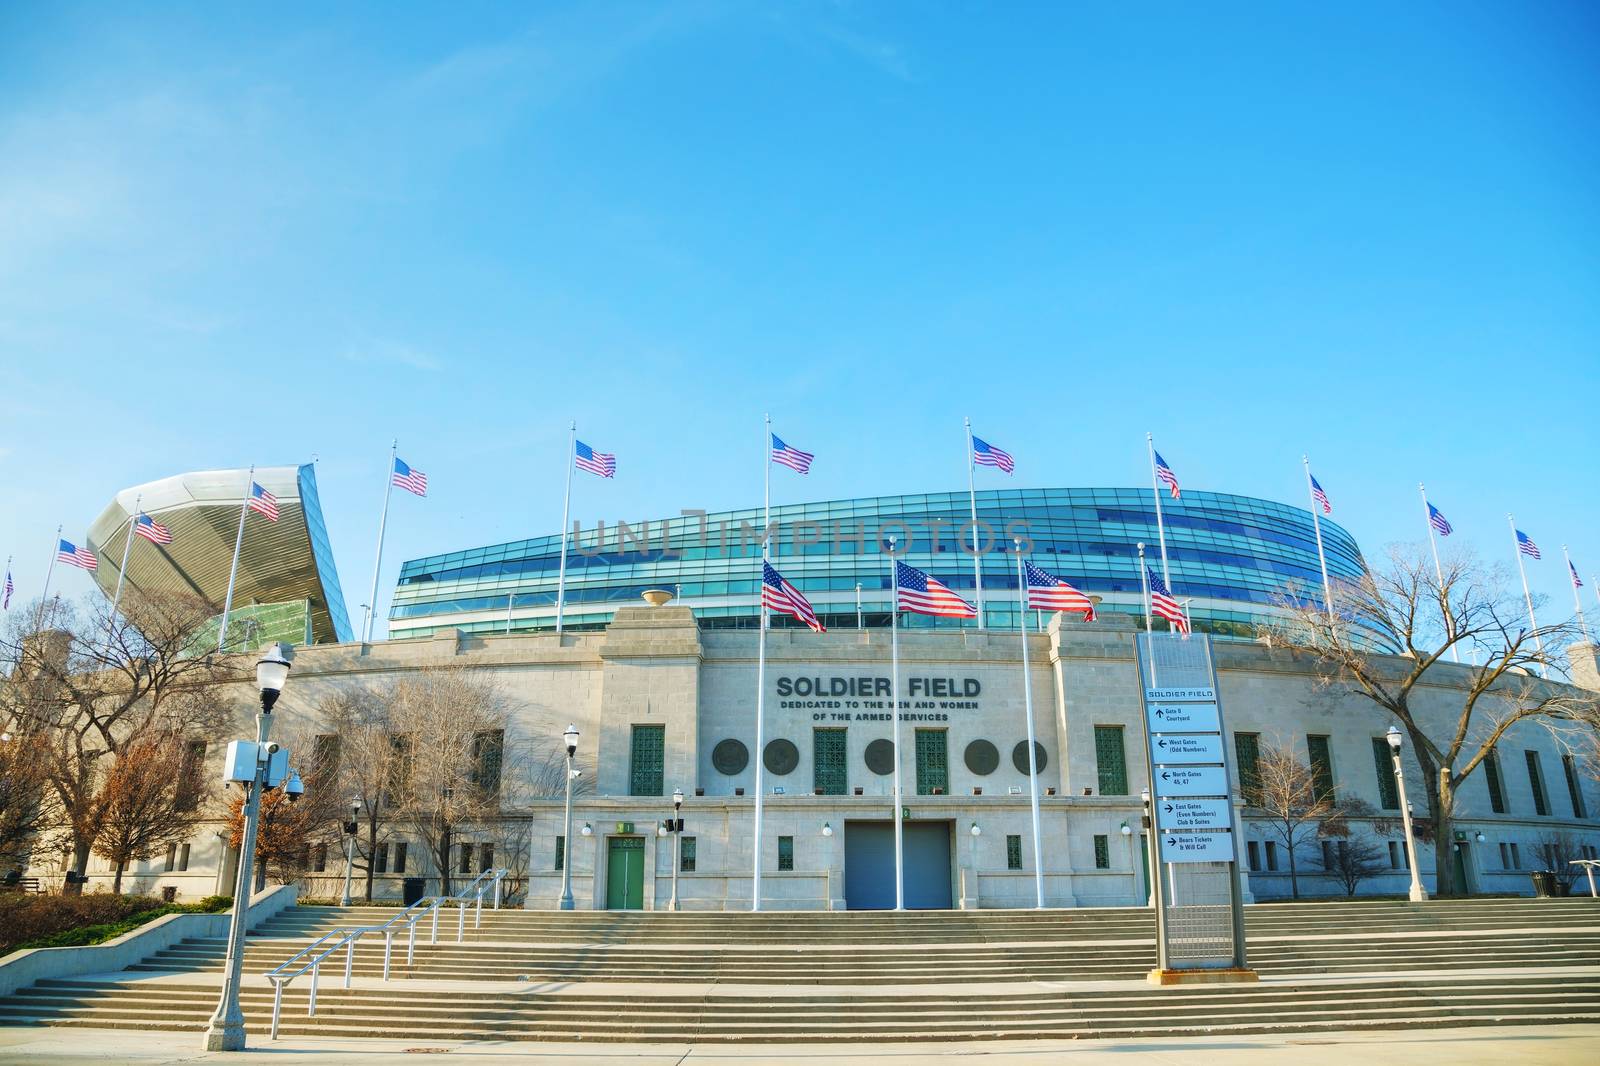 Soldier Field stadium in Chicago by AndreyKr